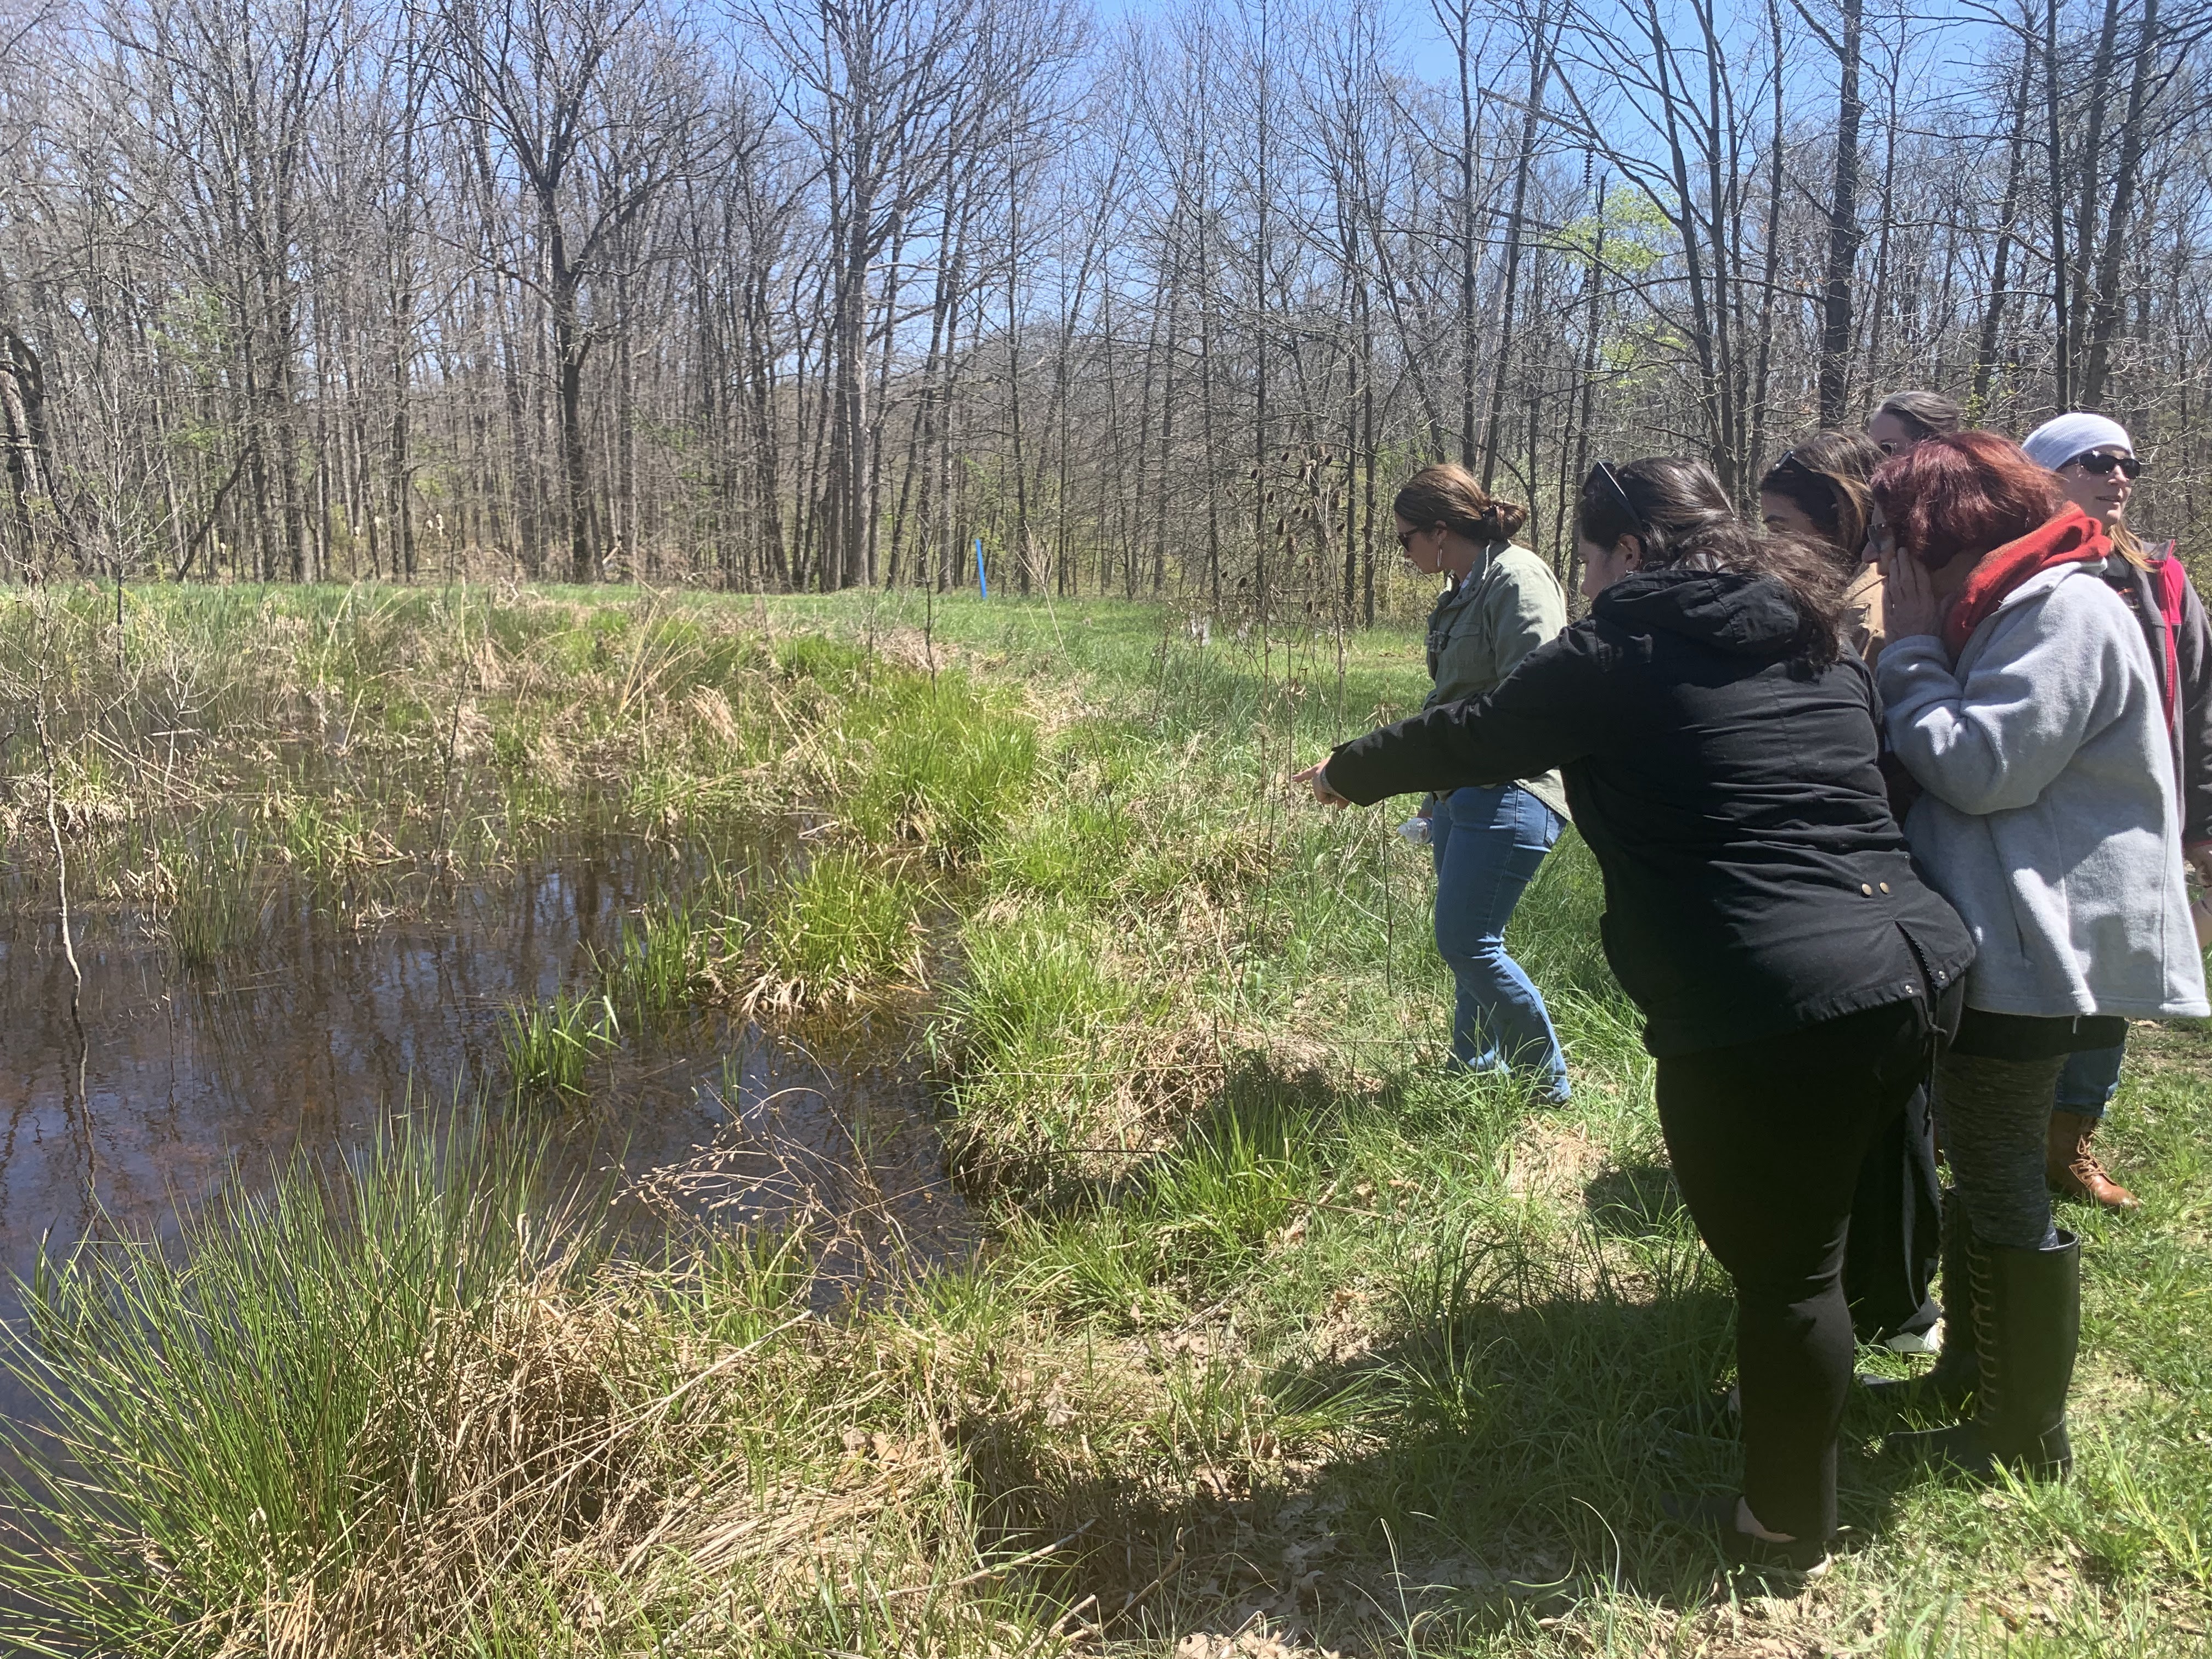 NARM participants explore a pond at Penney Nature Center in Defiance, Ohio